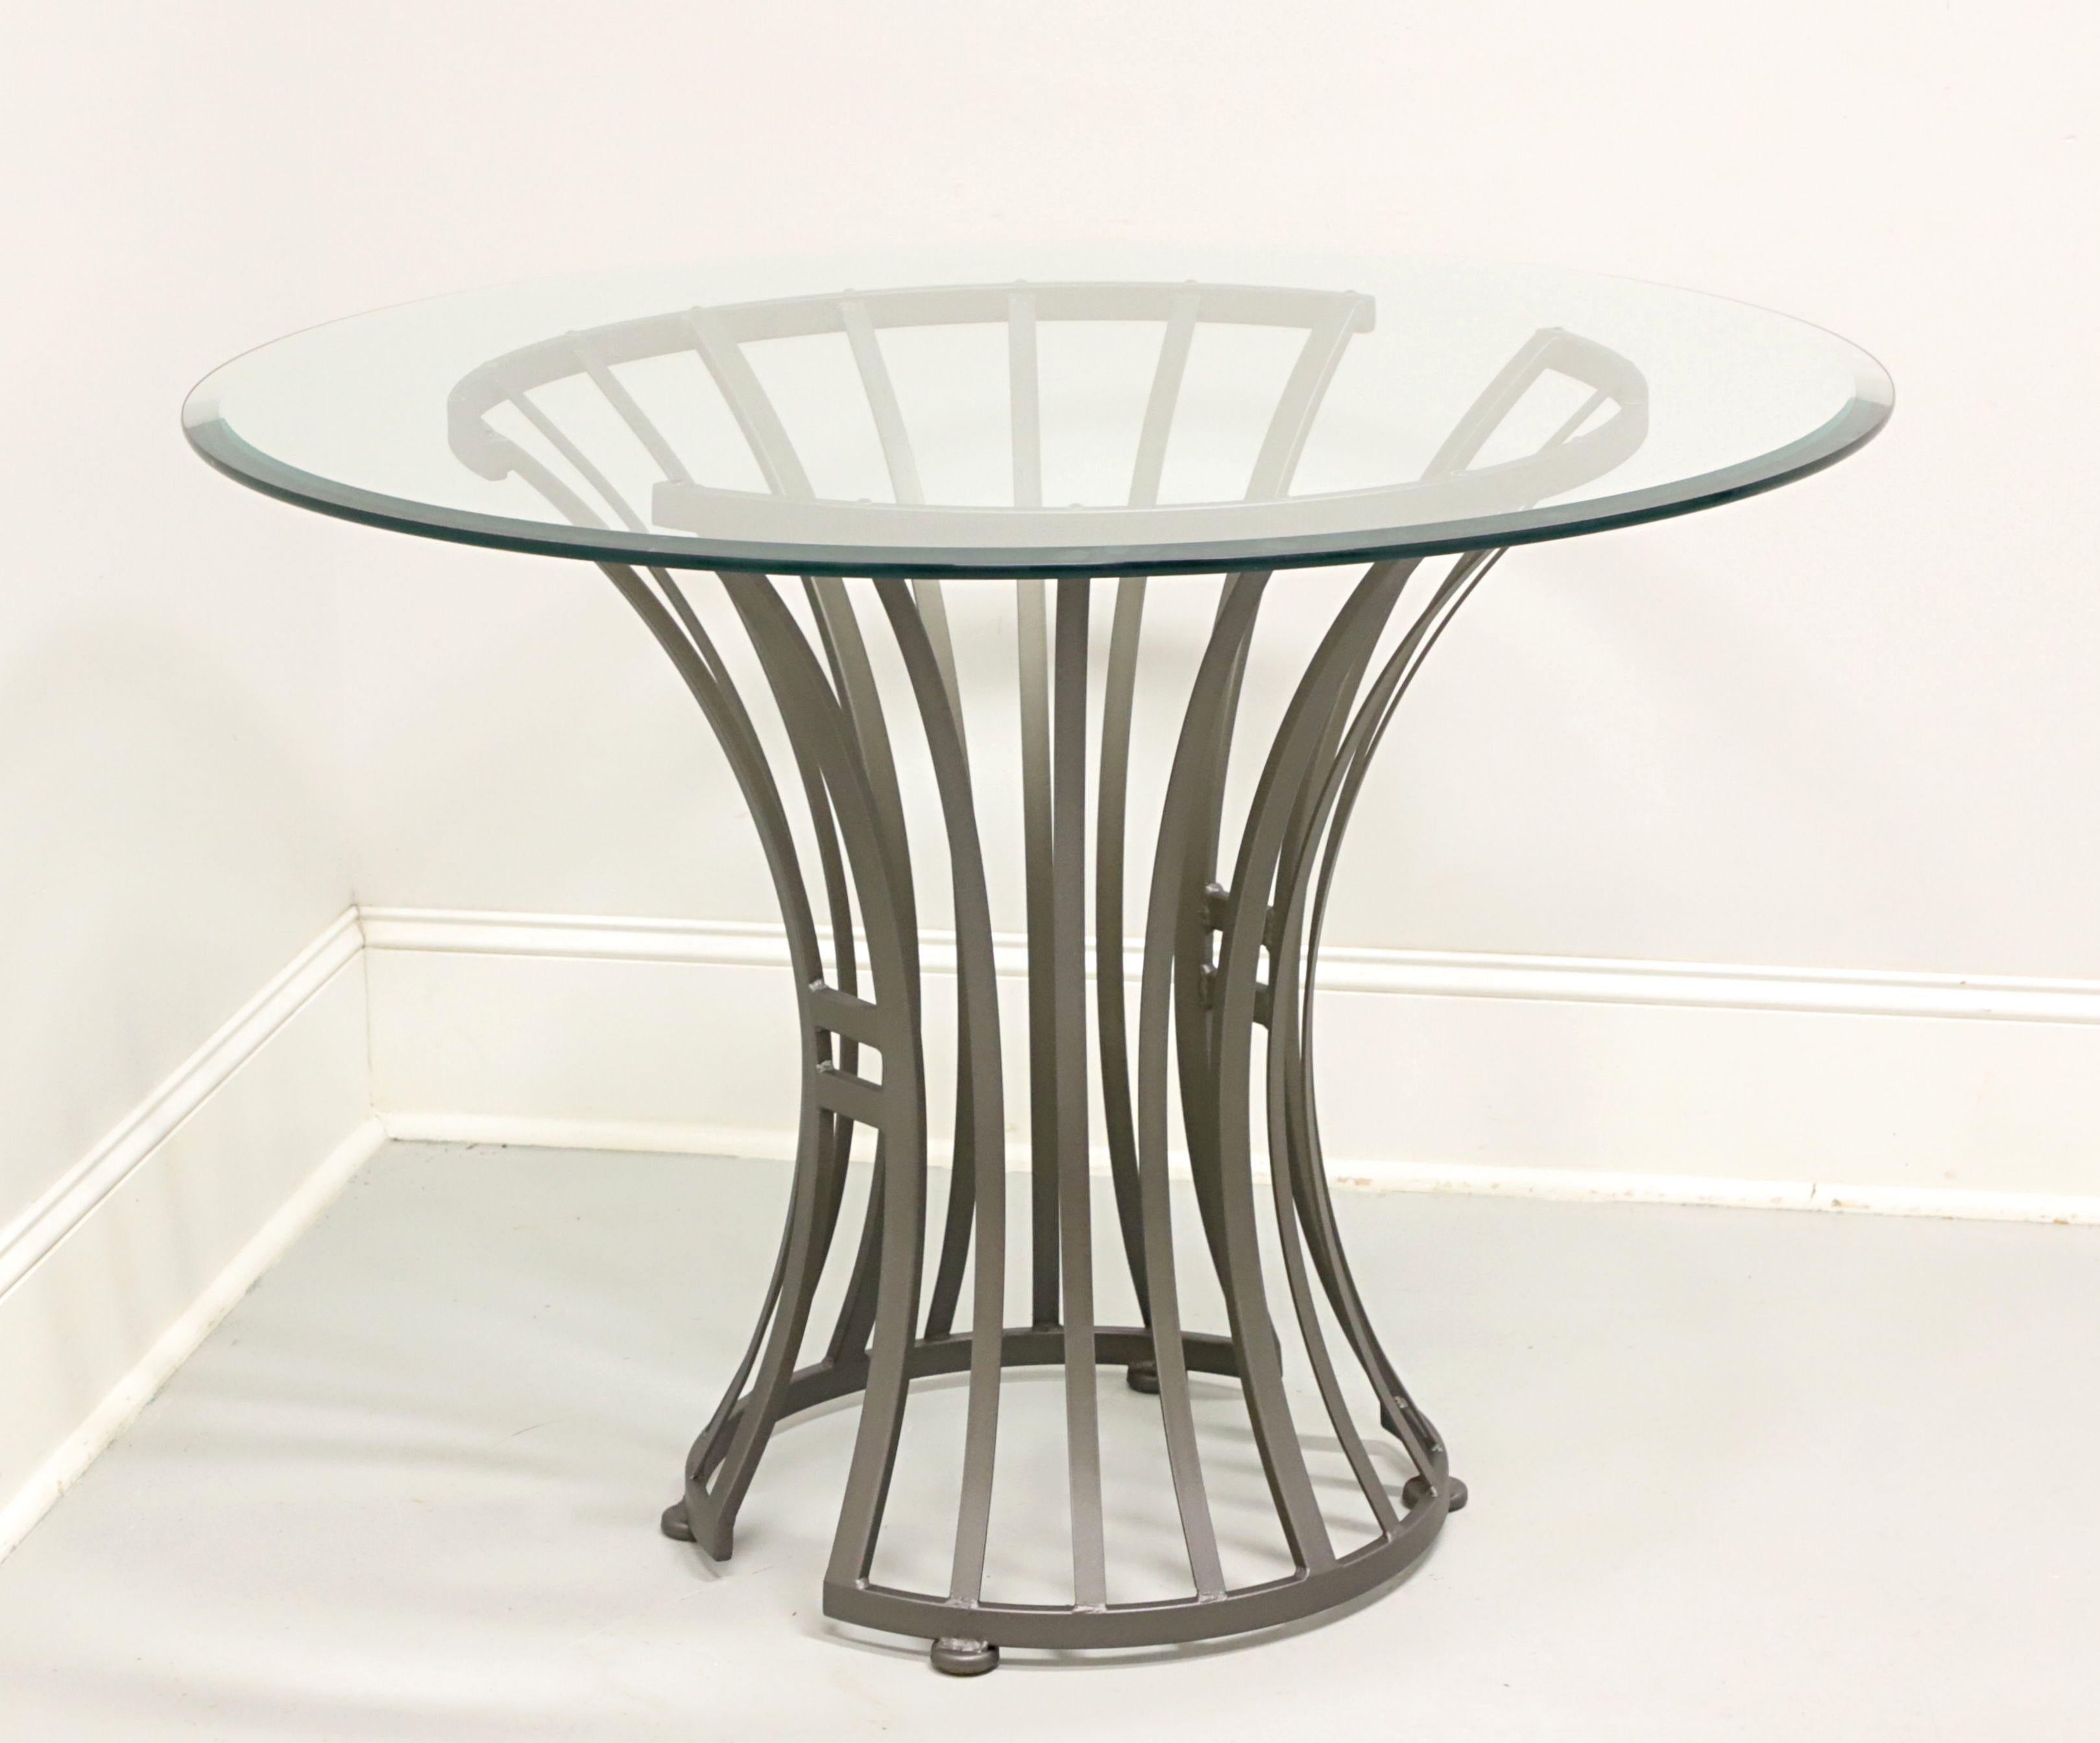 A Mid 20th Century Modern style round patio dining table designed by Arthur Umanoff for Shaver-Howard. Steel metal frame, round bevel edge glass top, grey color finish, flared wheat sheaf shaped pedestal base with open design, and cap feet. Made in